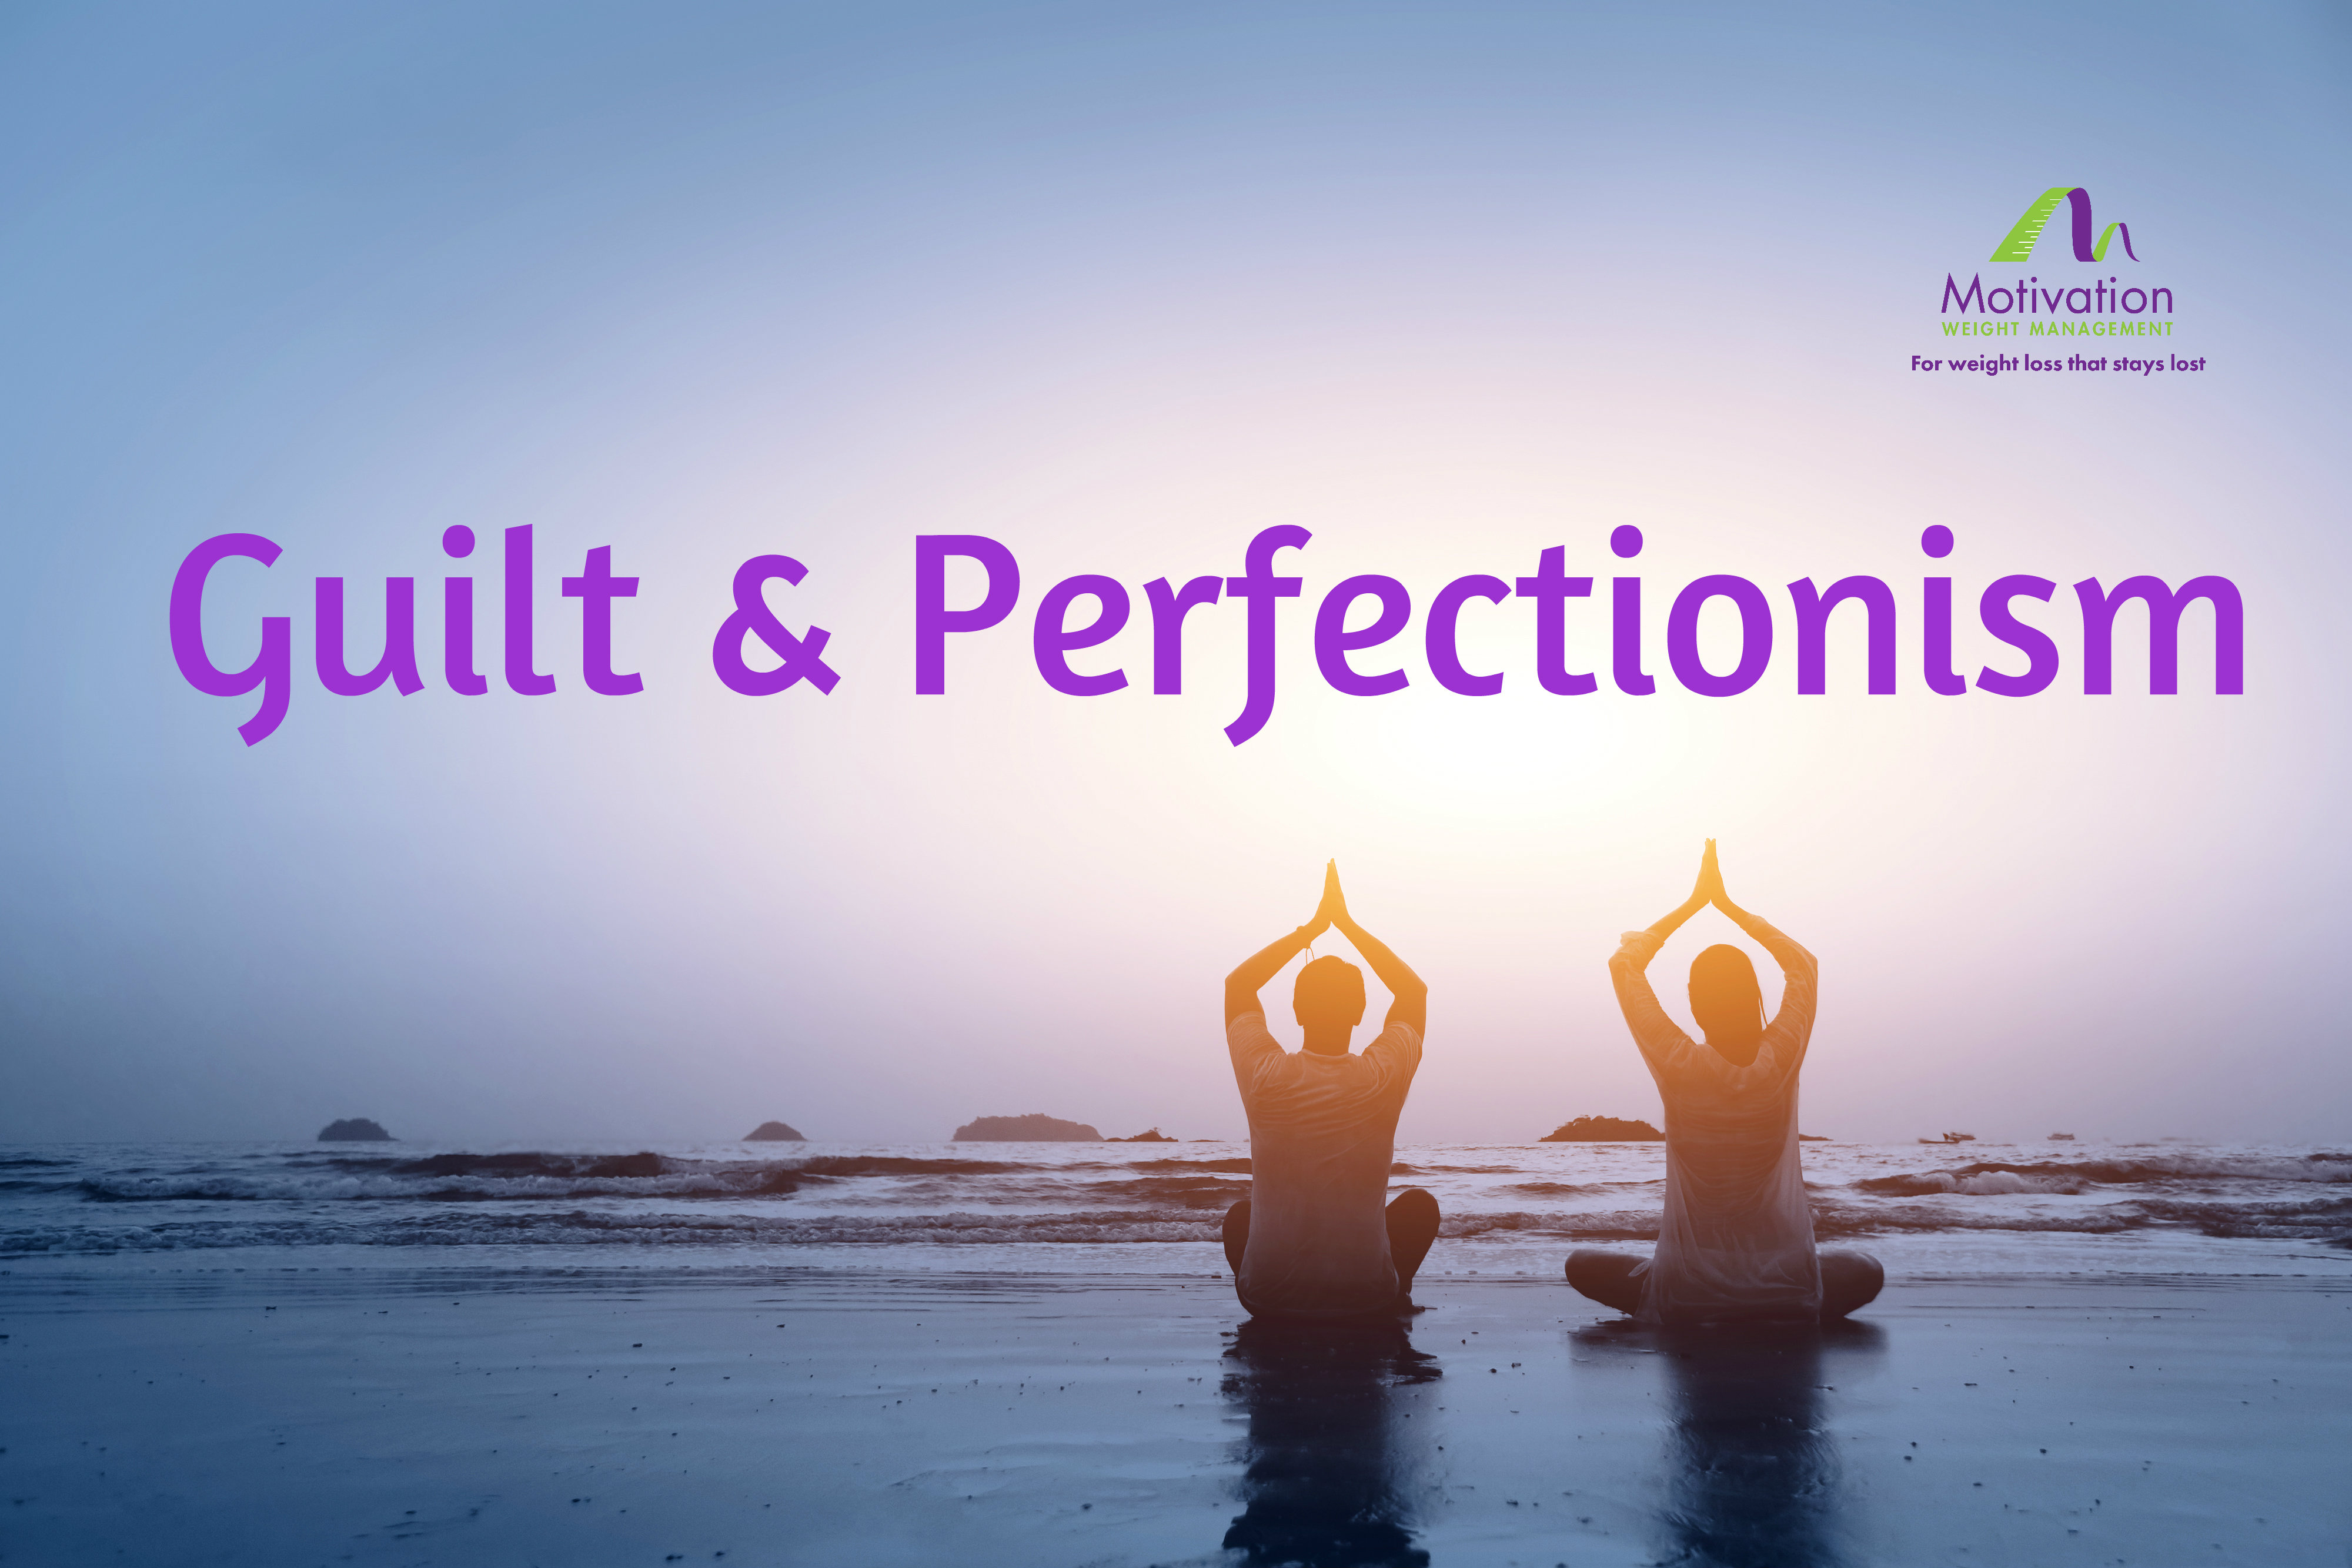 Day 20 Guilt & Perfectionism